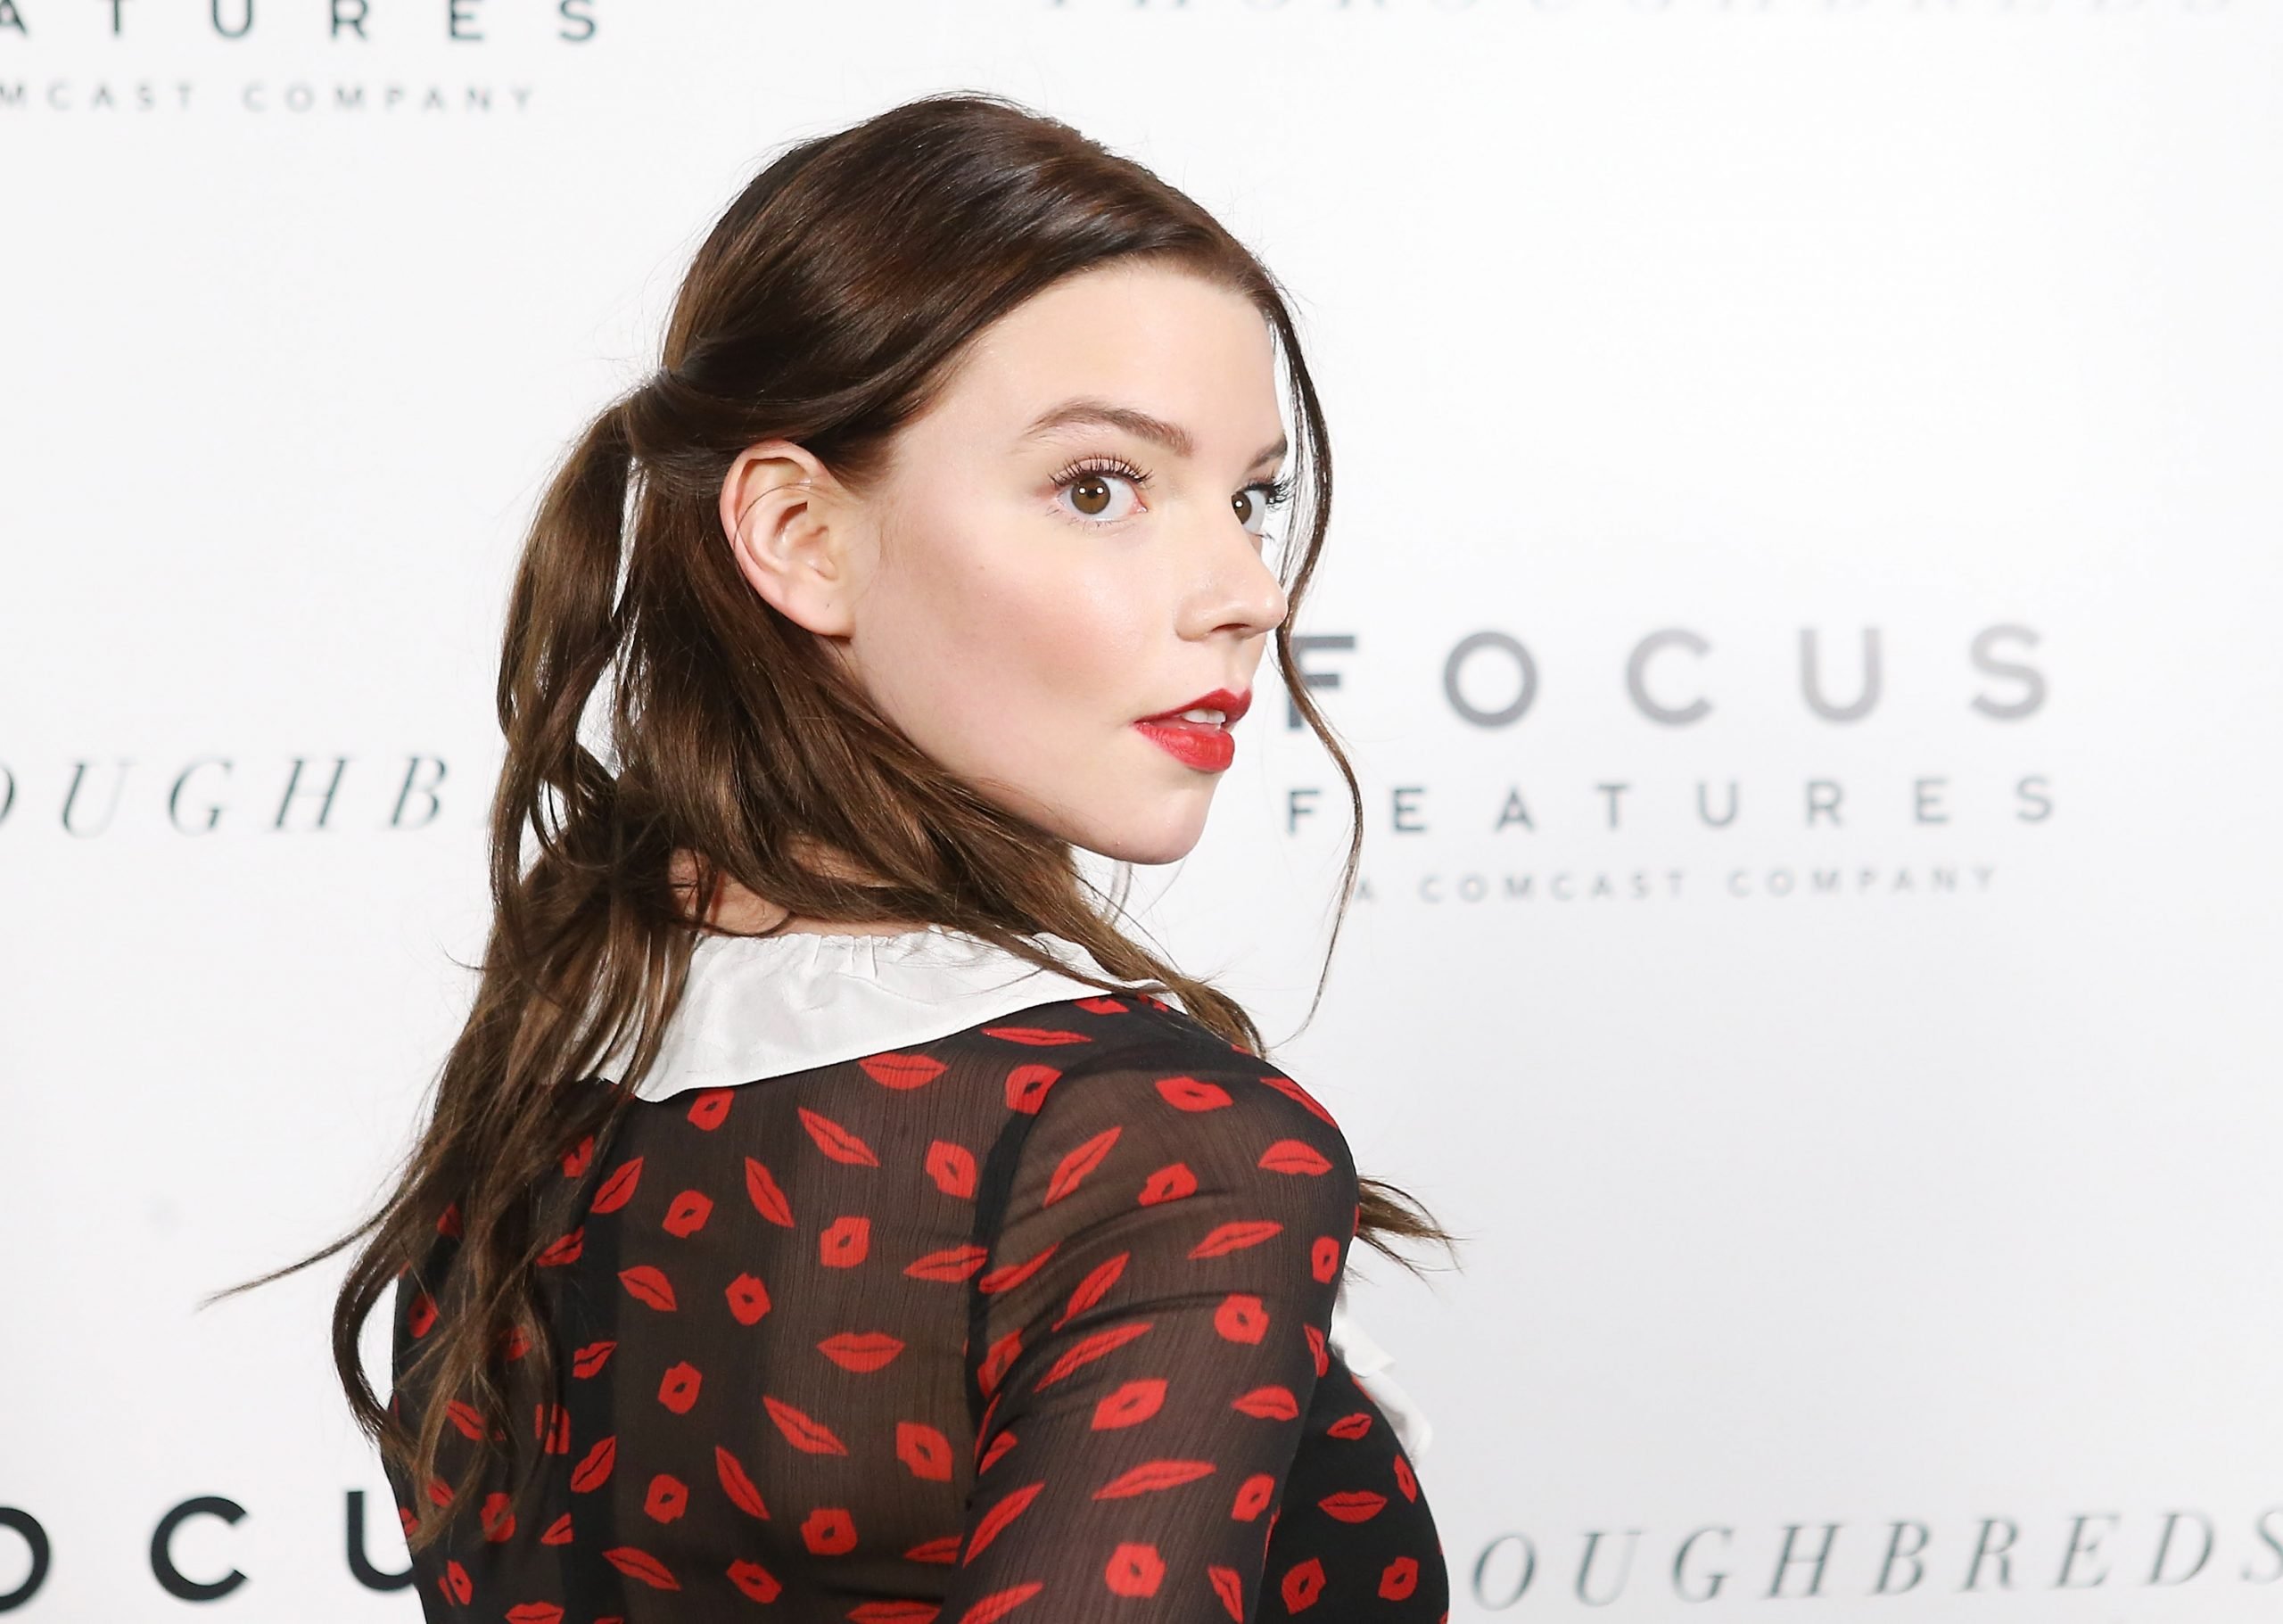 Who Is Anya Taylor-Joy? Everything To Know About The 'The Queen's